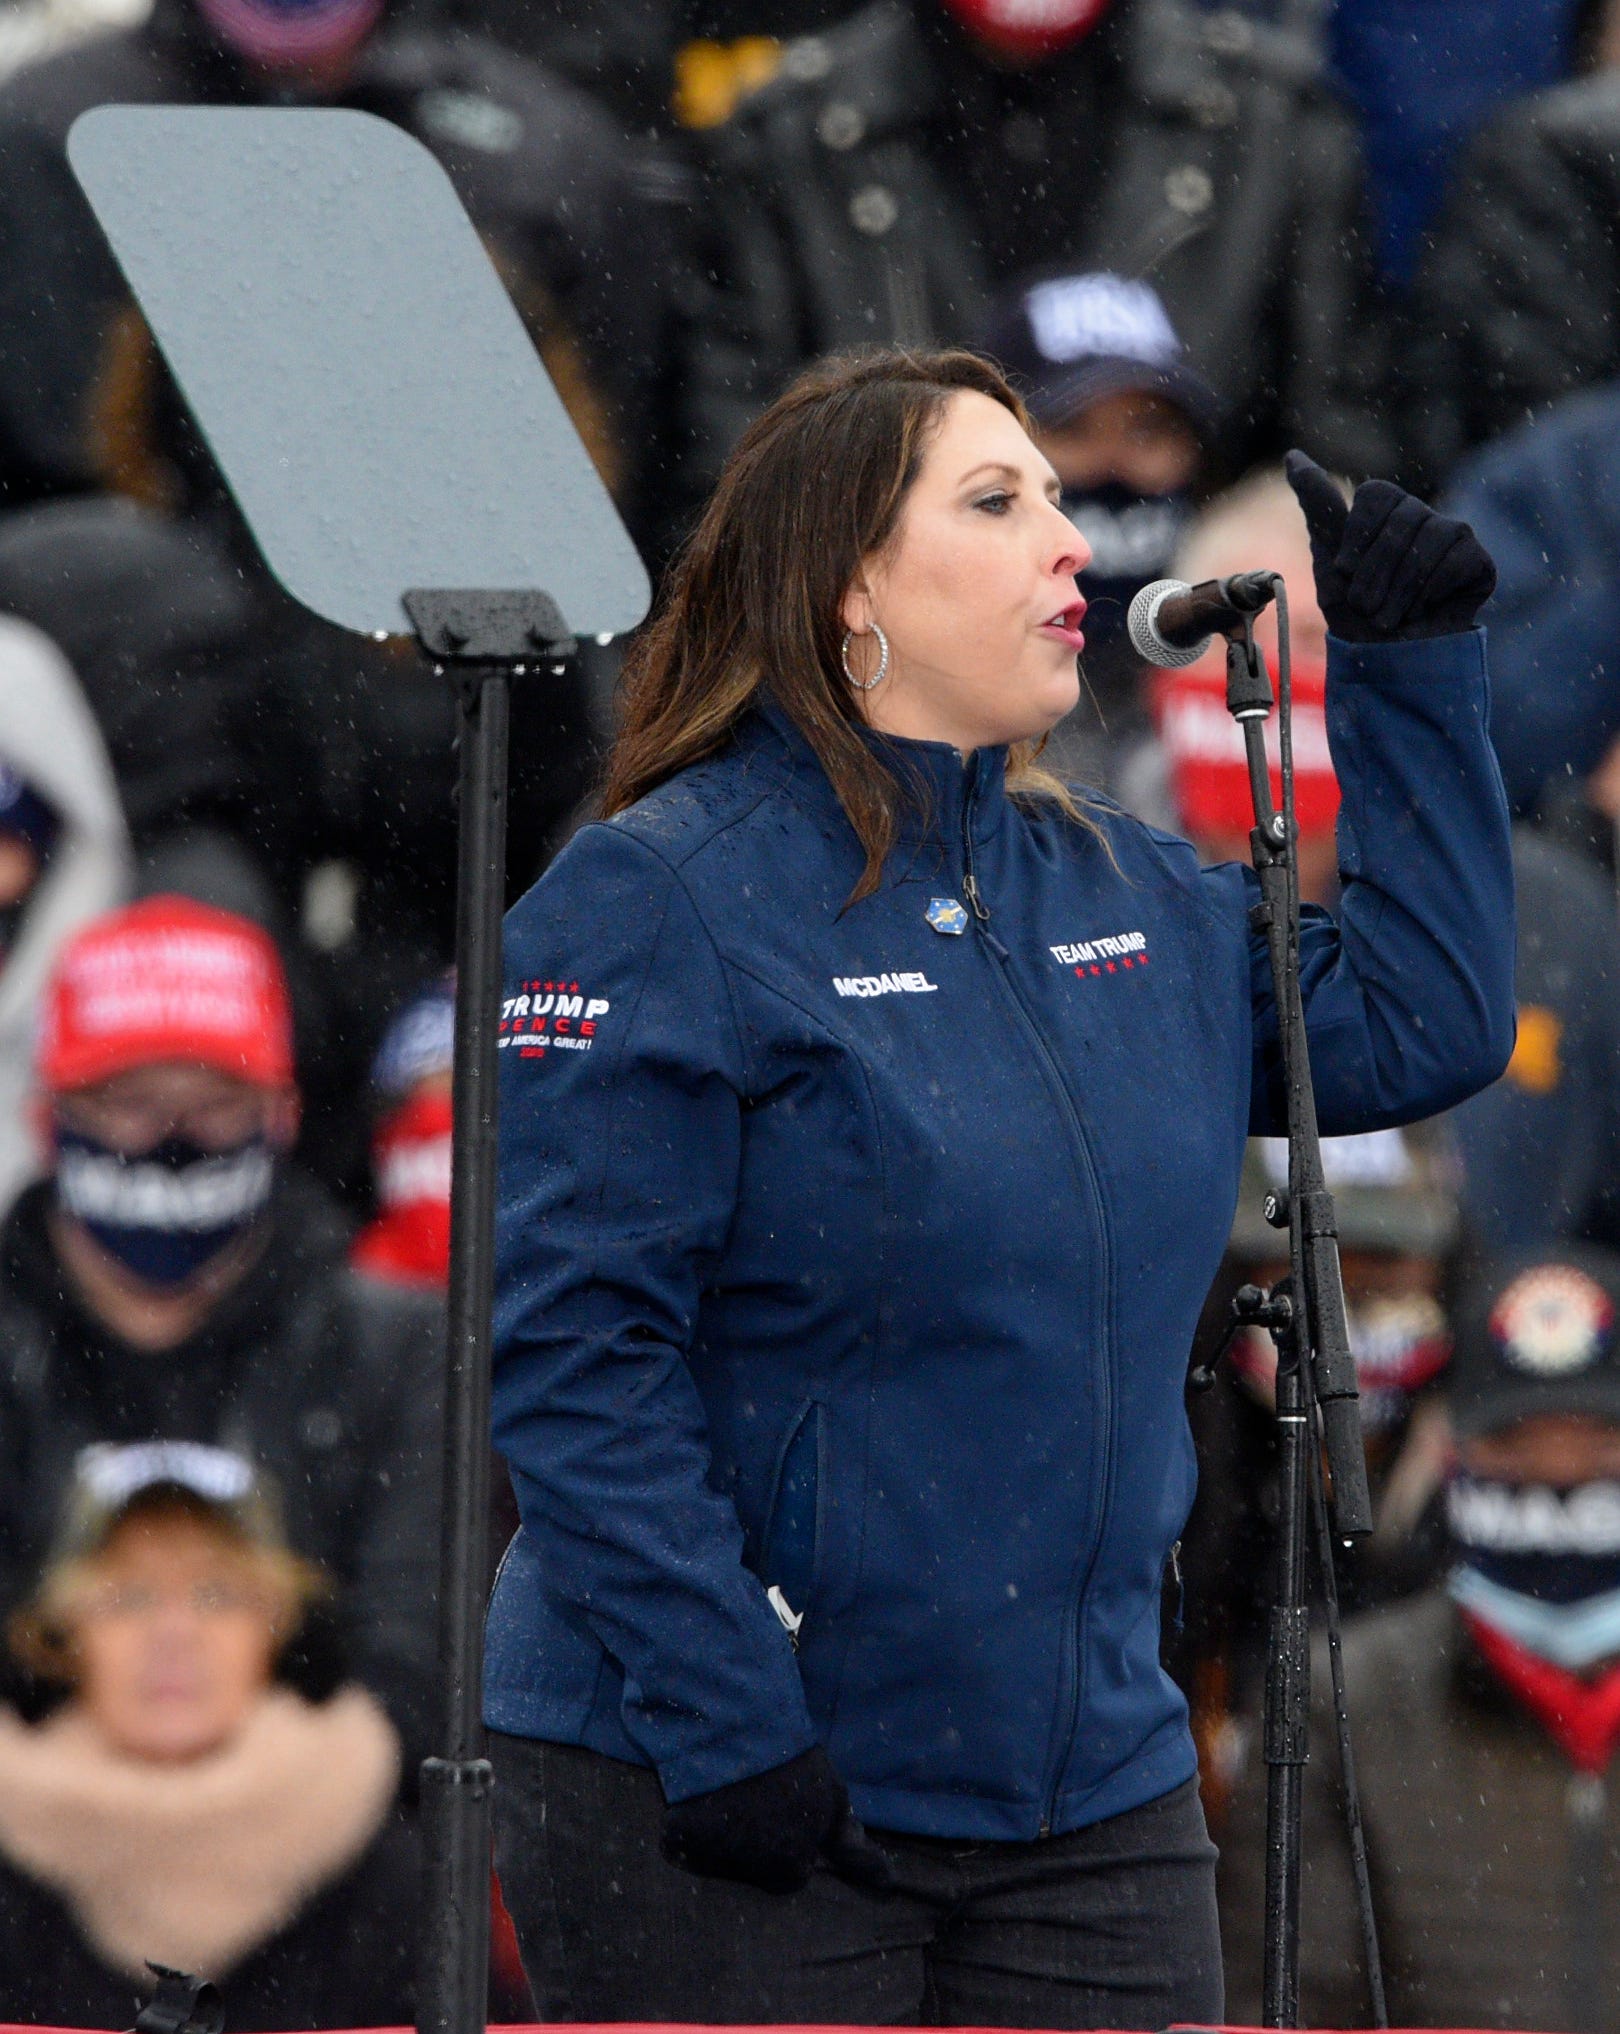 Republican National Committee Chair Ronna McDaniel fires up the crowd for Trump at the Lansing rally.